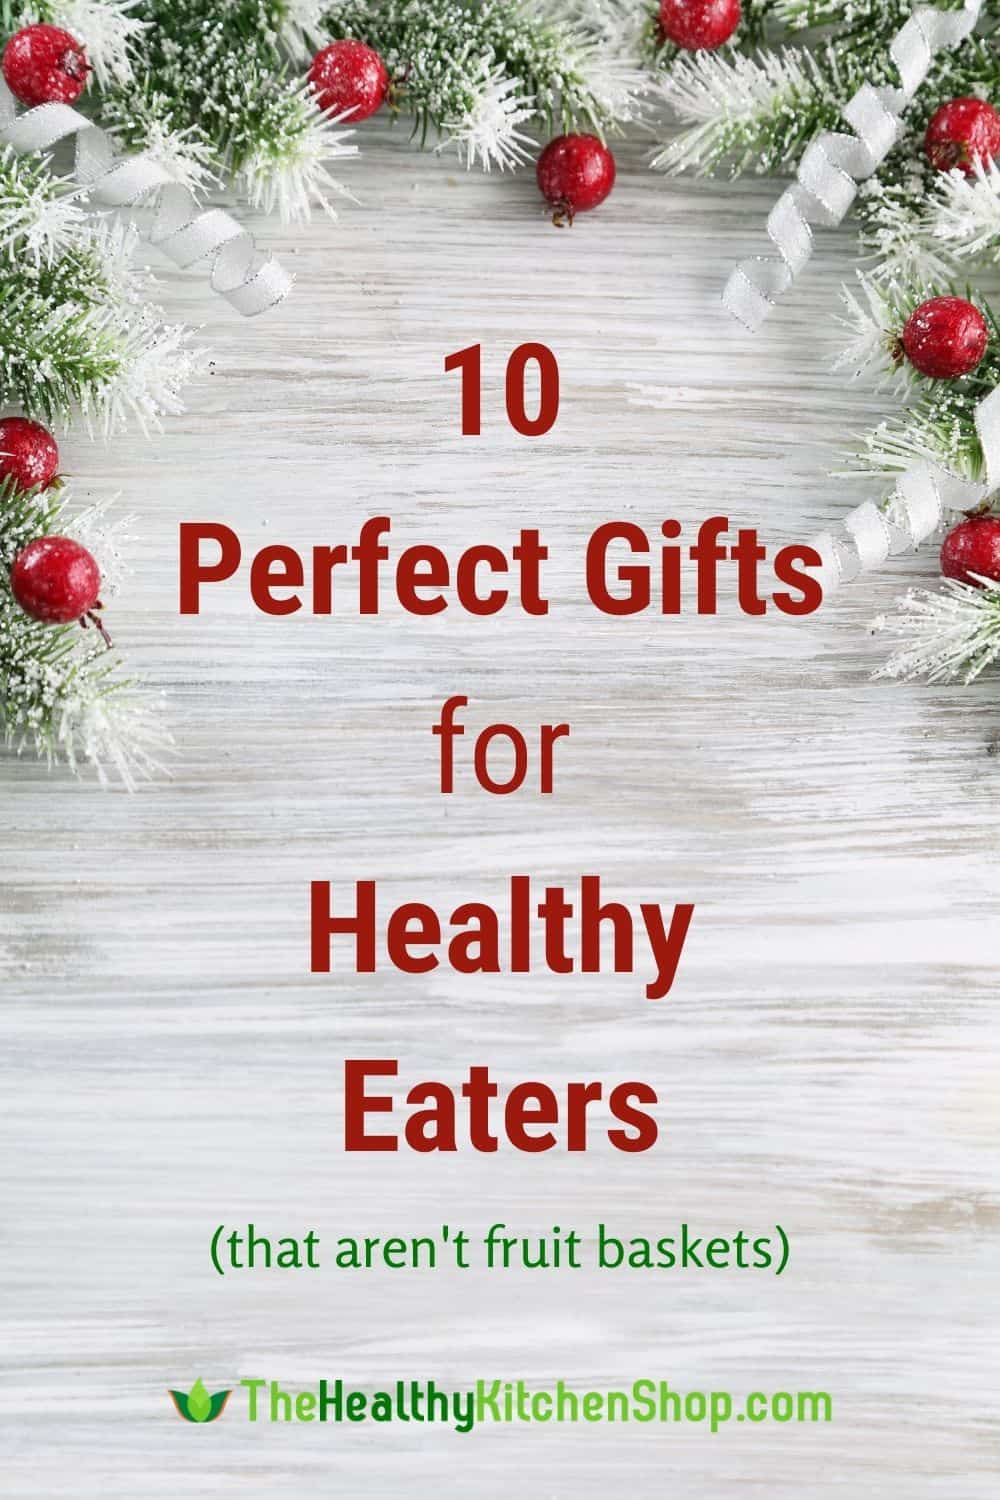 10 Perfect Gifts for Healthy Eaters